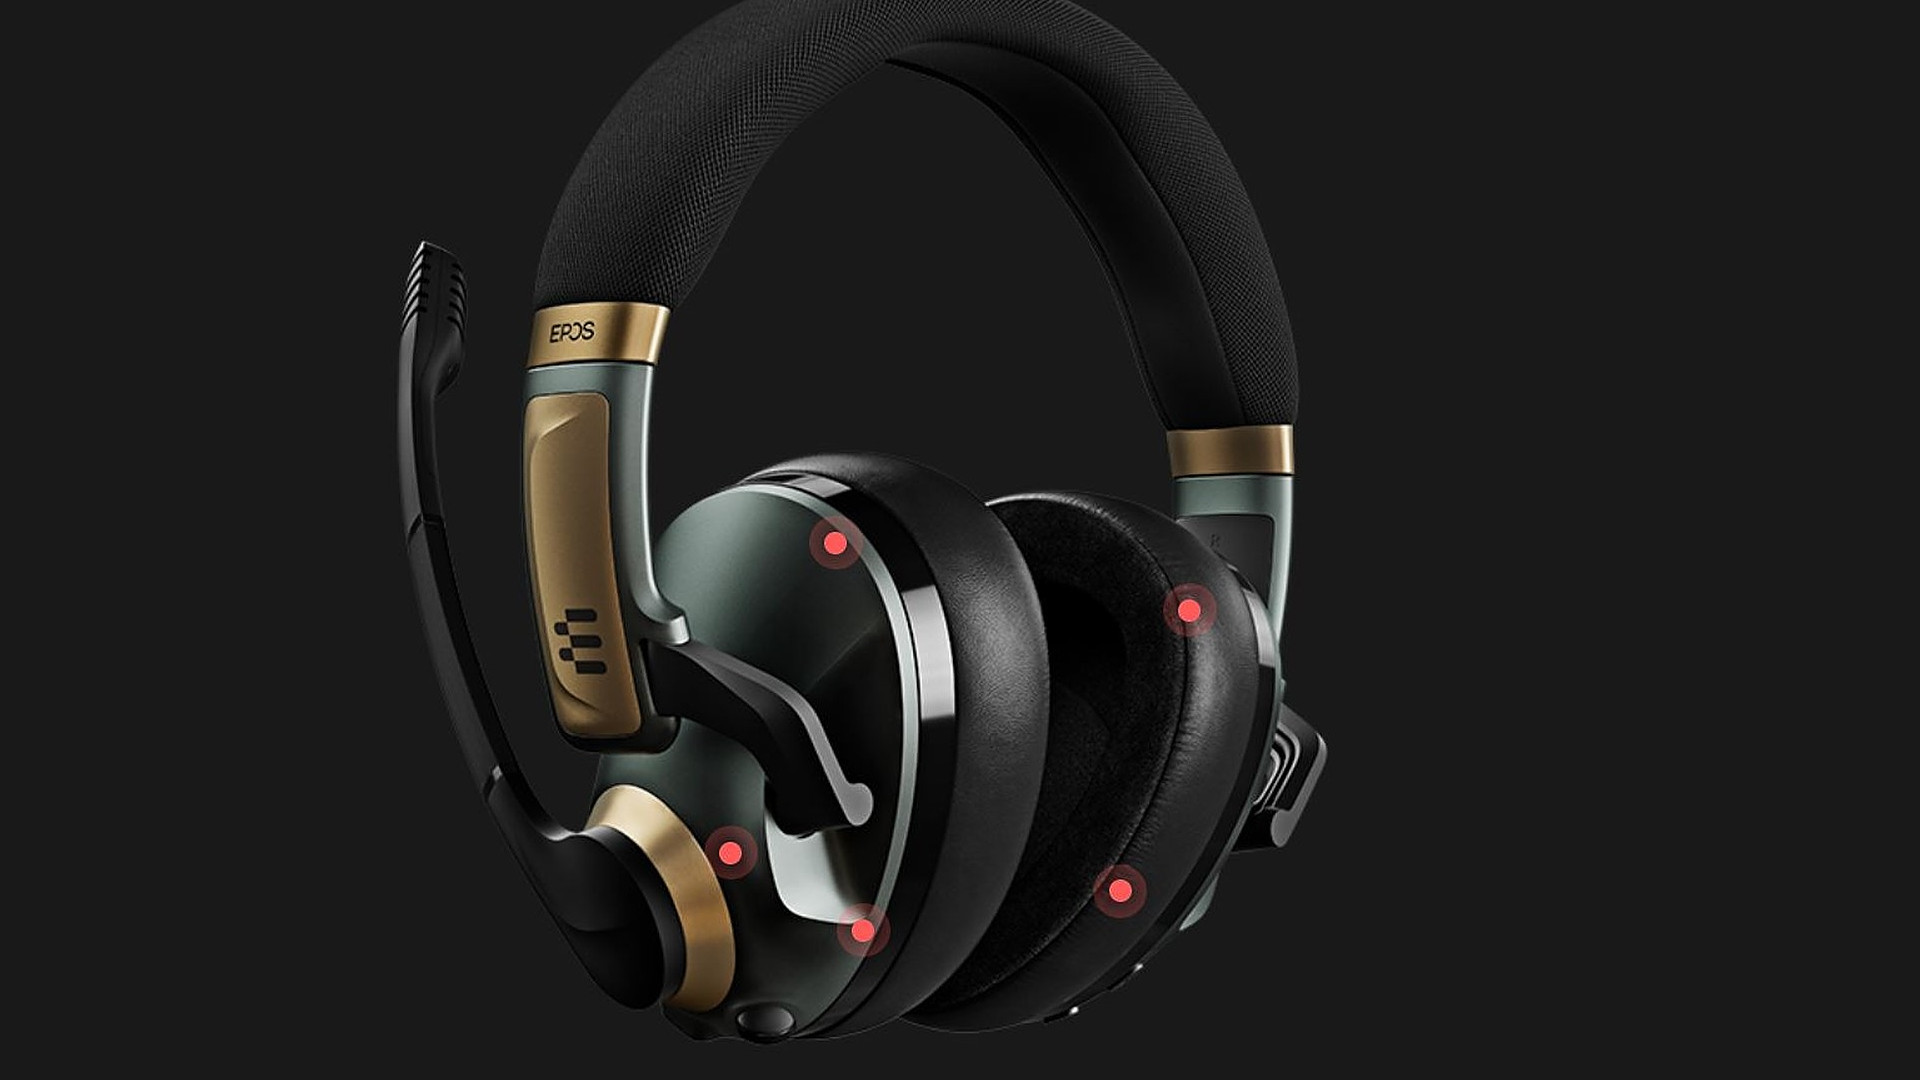 I loved a $280 gaming headset for 14 months,